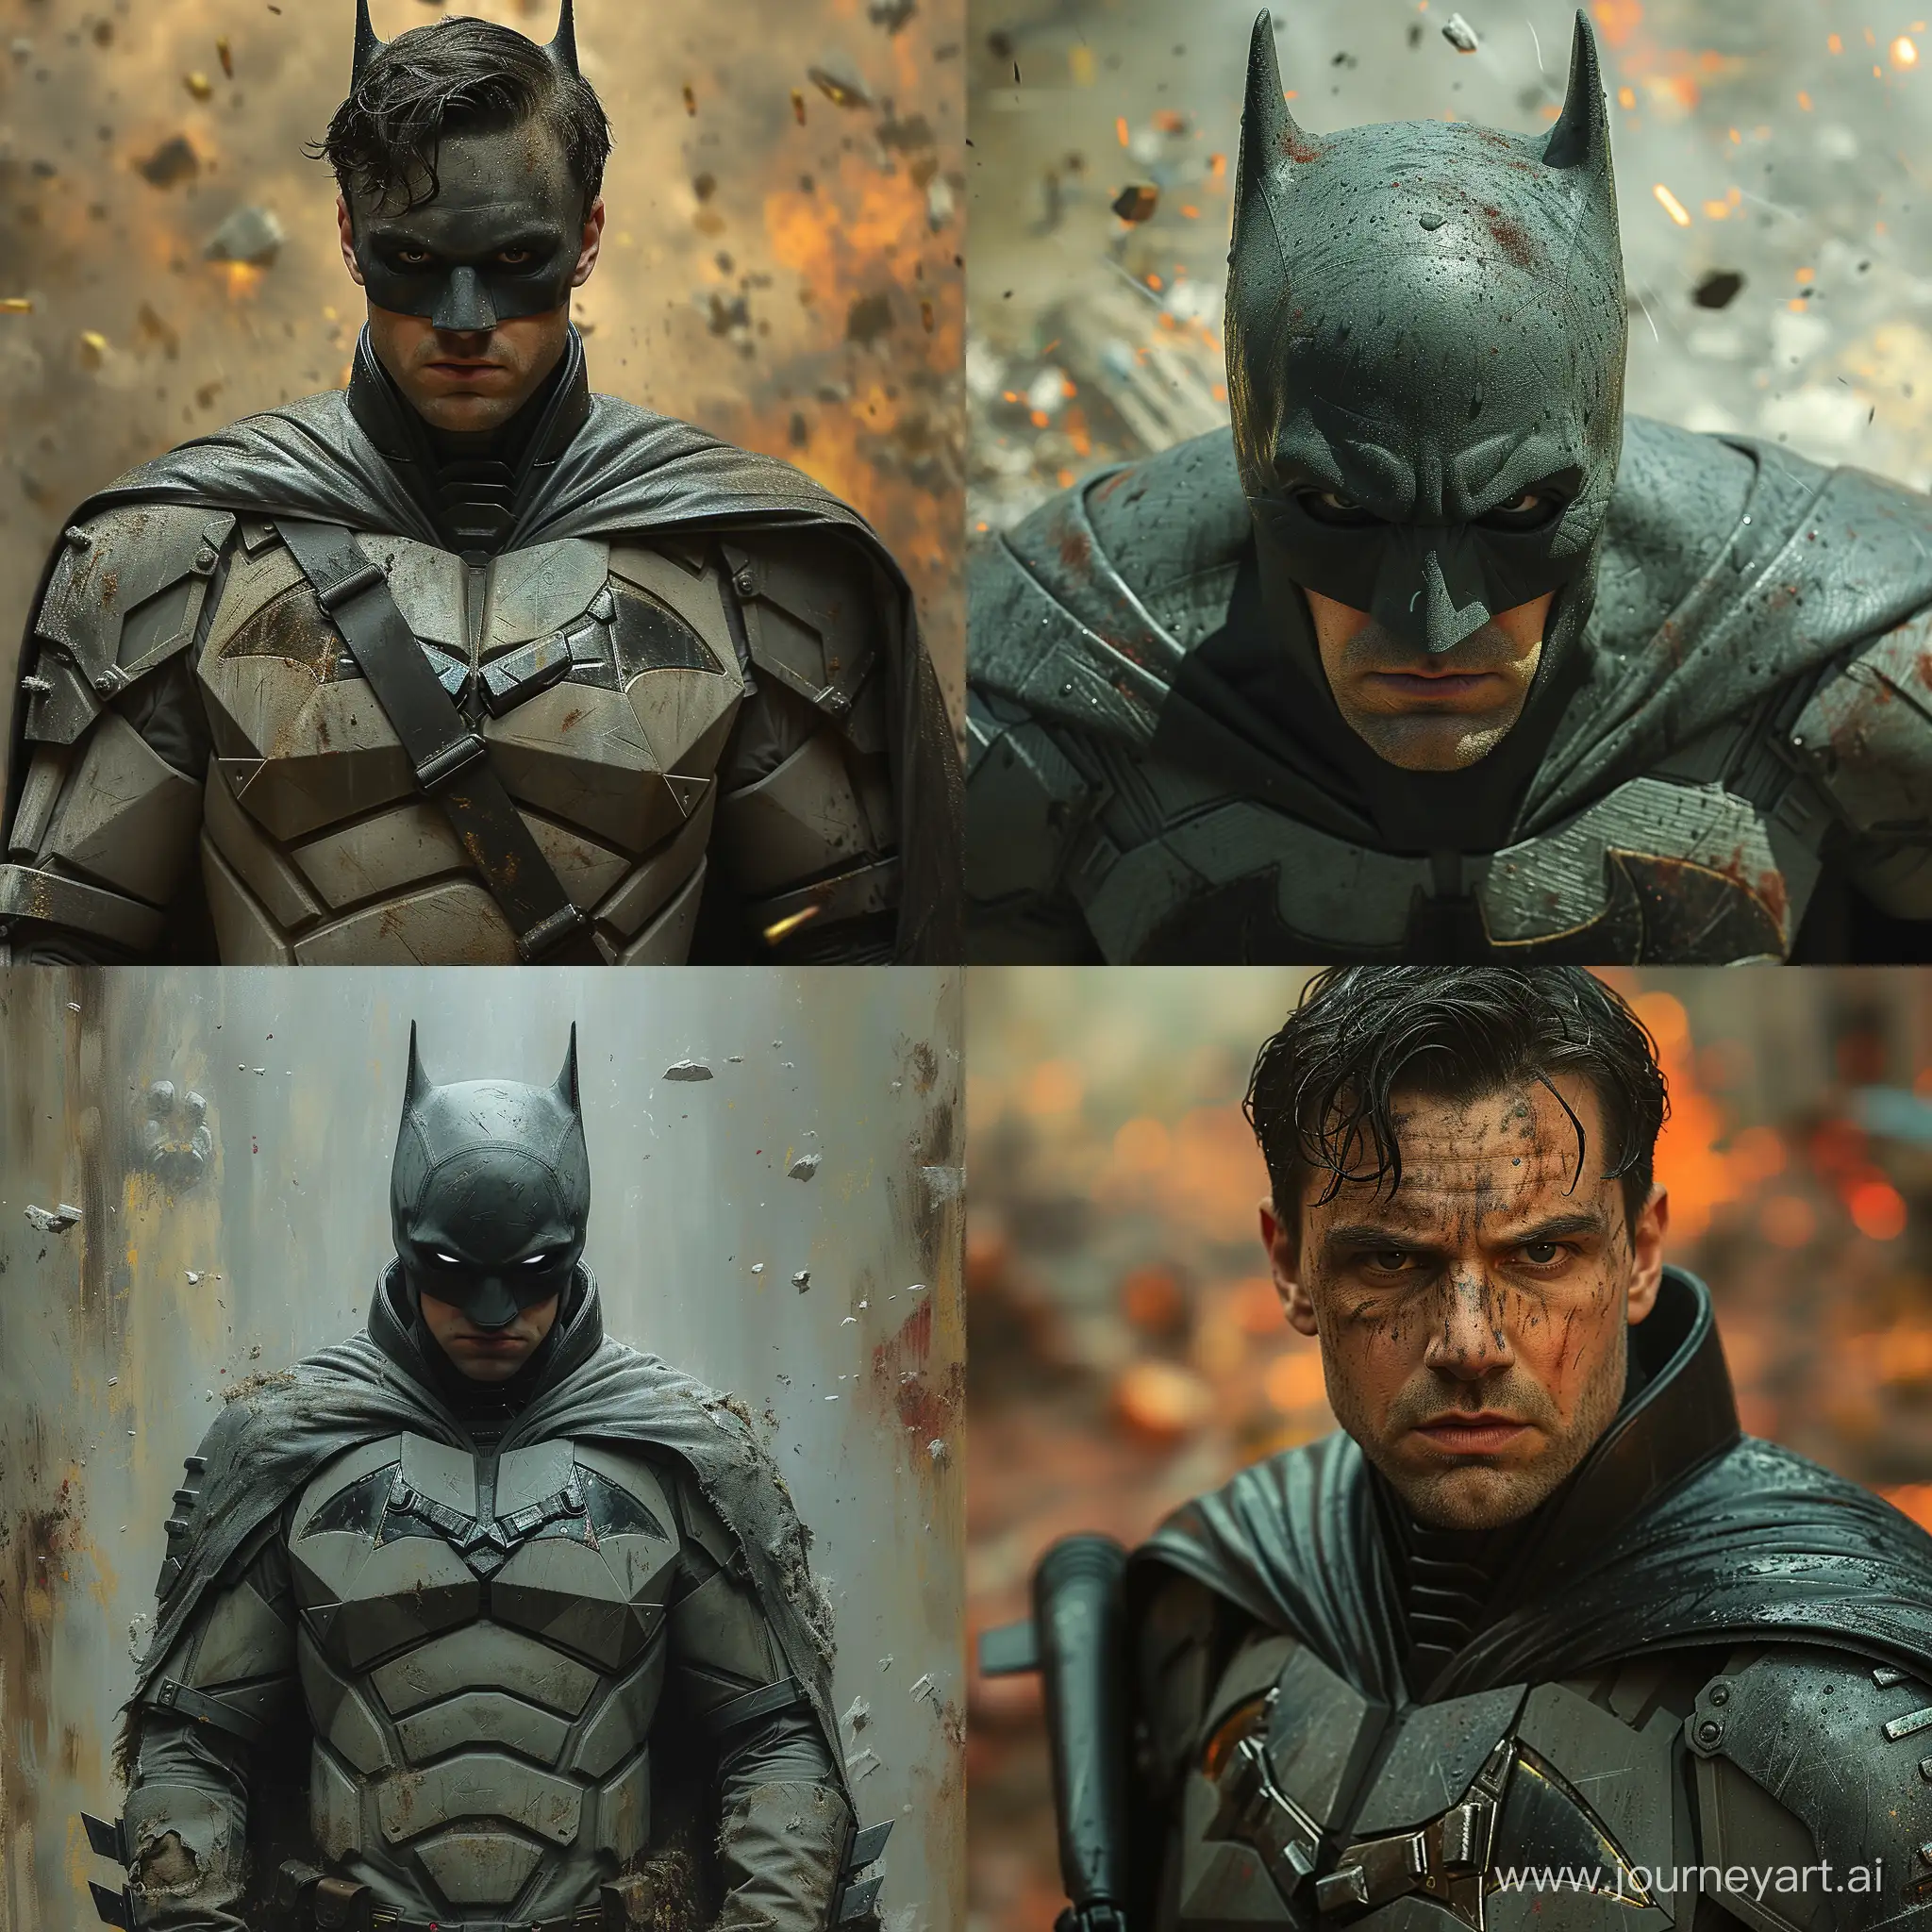 The Batman from 2022 movie has a menacing personality, a costume intended to create a sinister appearance
Batman wears his costume, suggesting a story of survival or combat. It is worth noting that Batman holds a firearm with a focused gaze, which enhances the feeling of threat.The background behind Batman is unclear and chaotic, with undertones suggesting a post-apocalyptic or war-torn environment. This background completes the hostile image of Batman.Designed to induce a feeling of unease or to subvert the usual cheerful connotation The combination of the Batman motif and aggressive elements creates a juxtaposition that is often used in various forms of media to elicit a strong emotional response --stylize 750
